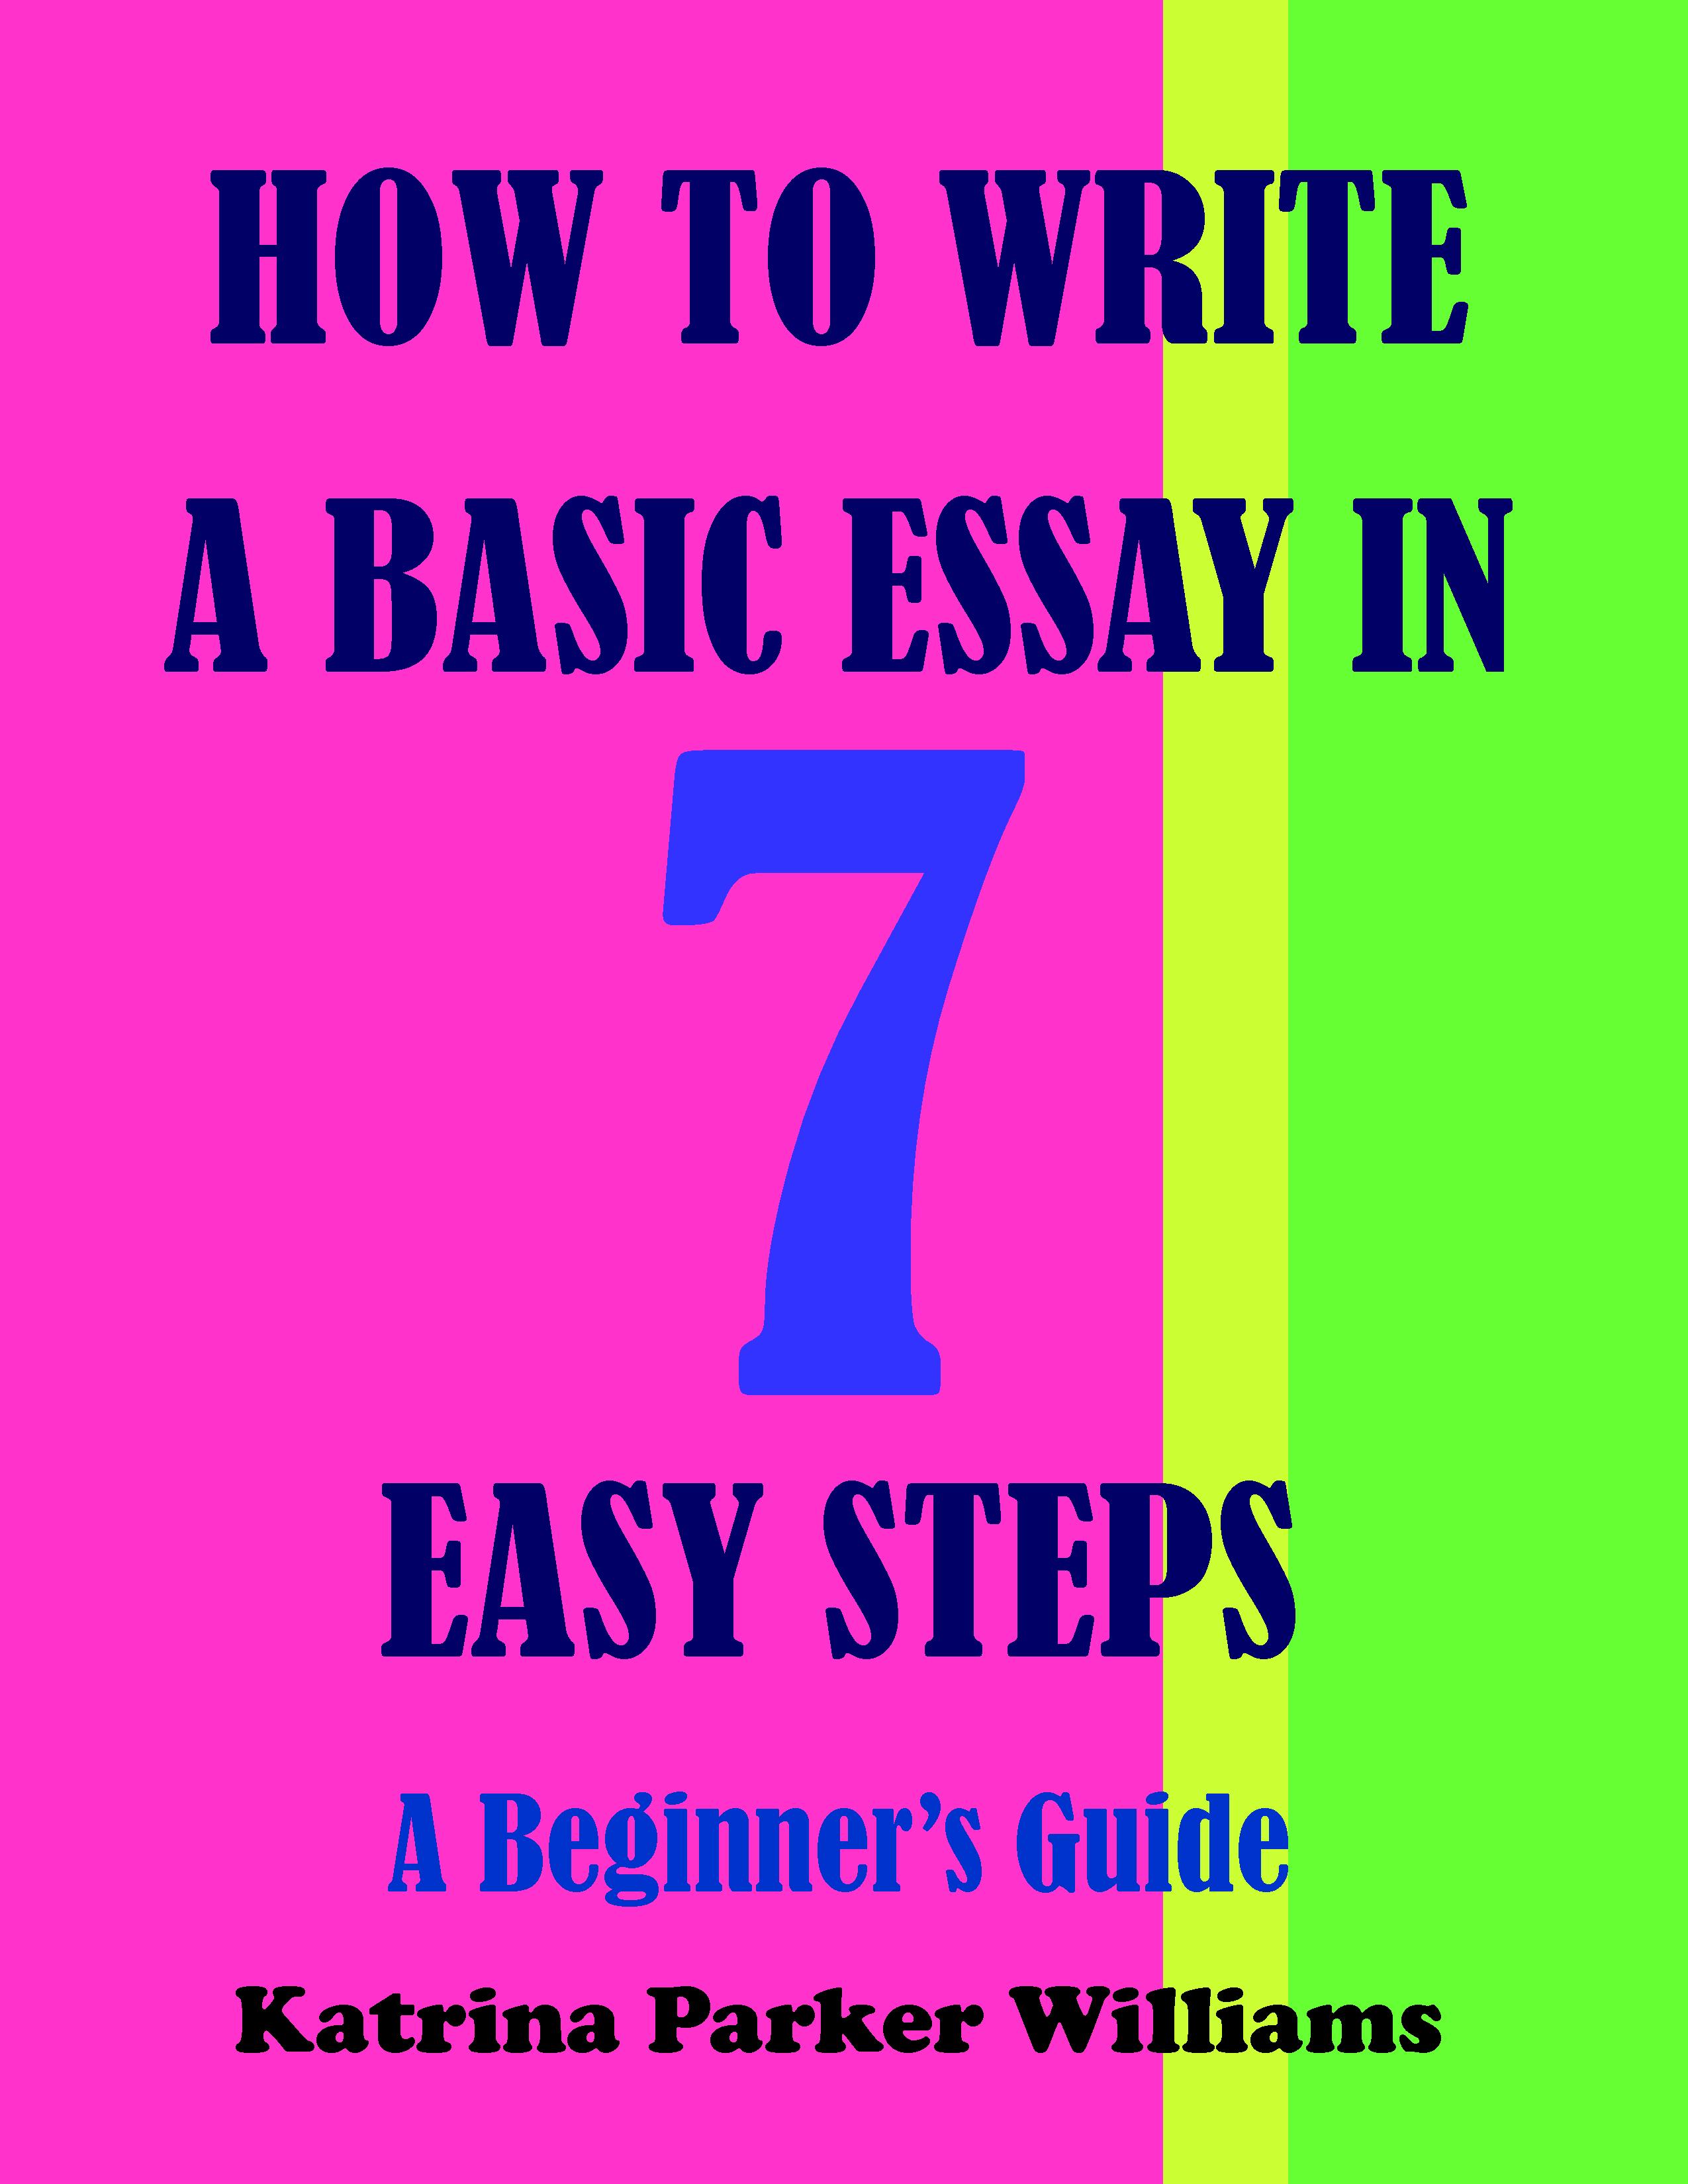 8 Tips for writing an excellent essay